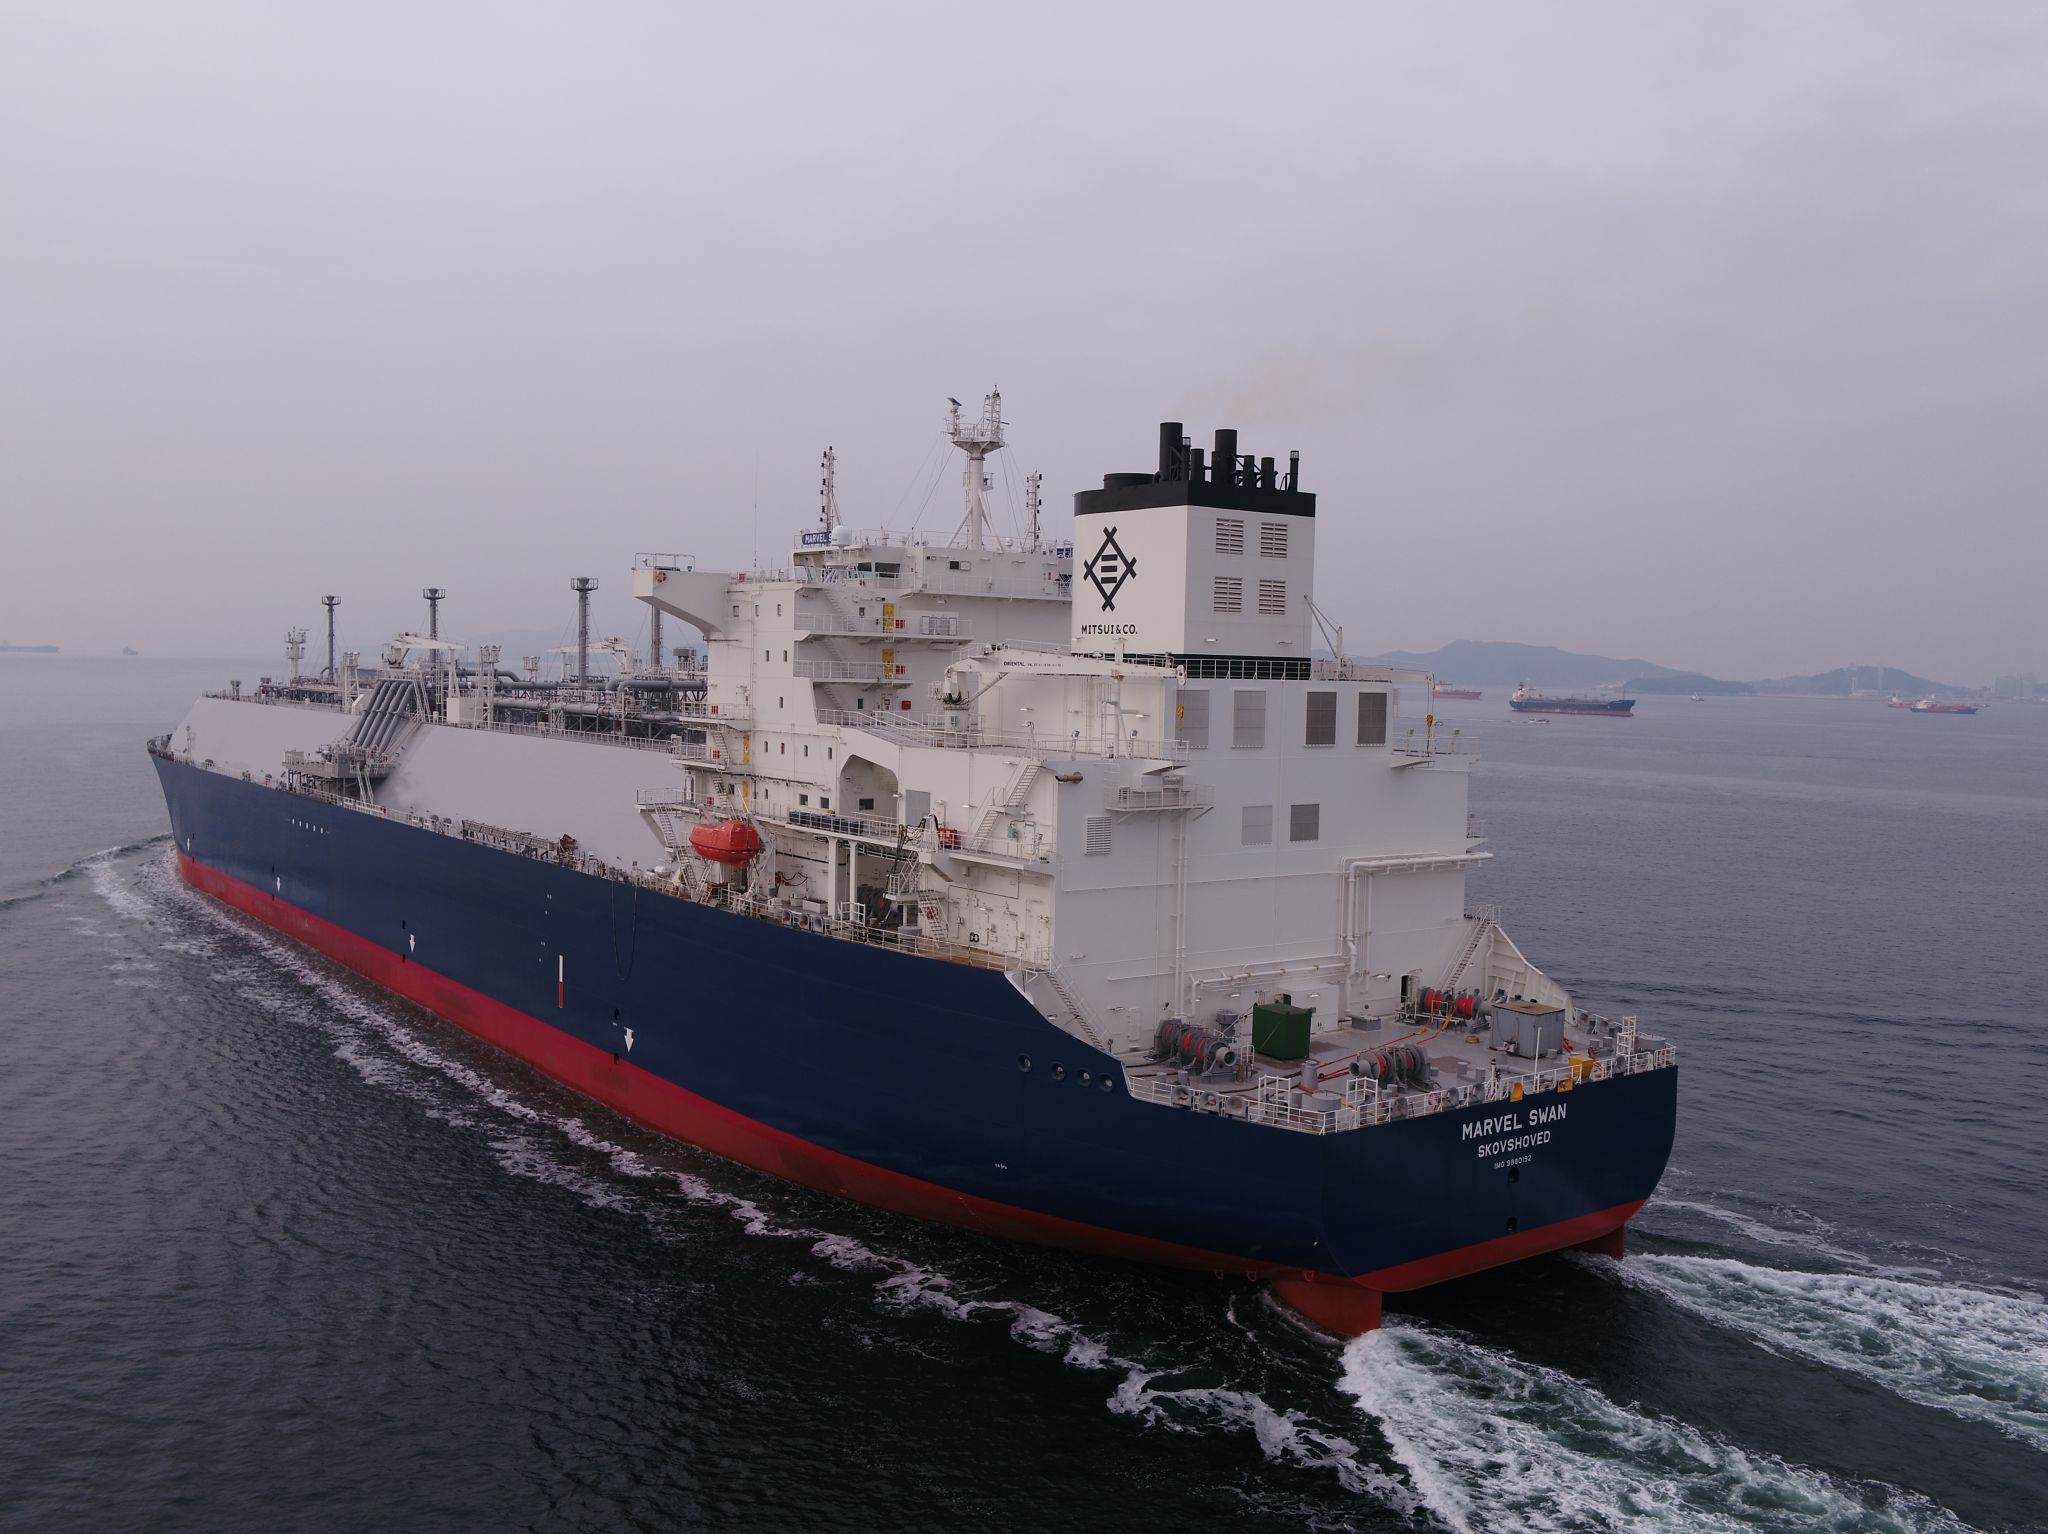 SHI delivers Navigare's first LNG carrier